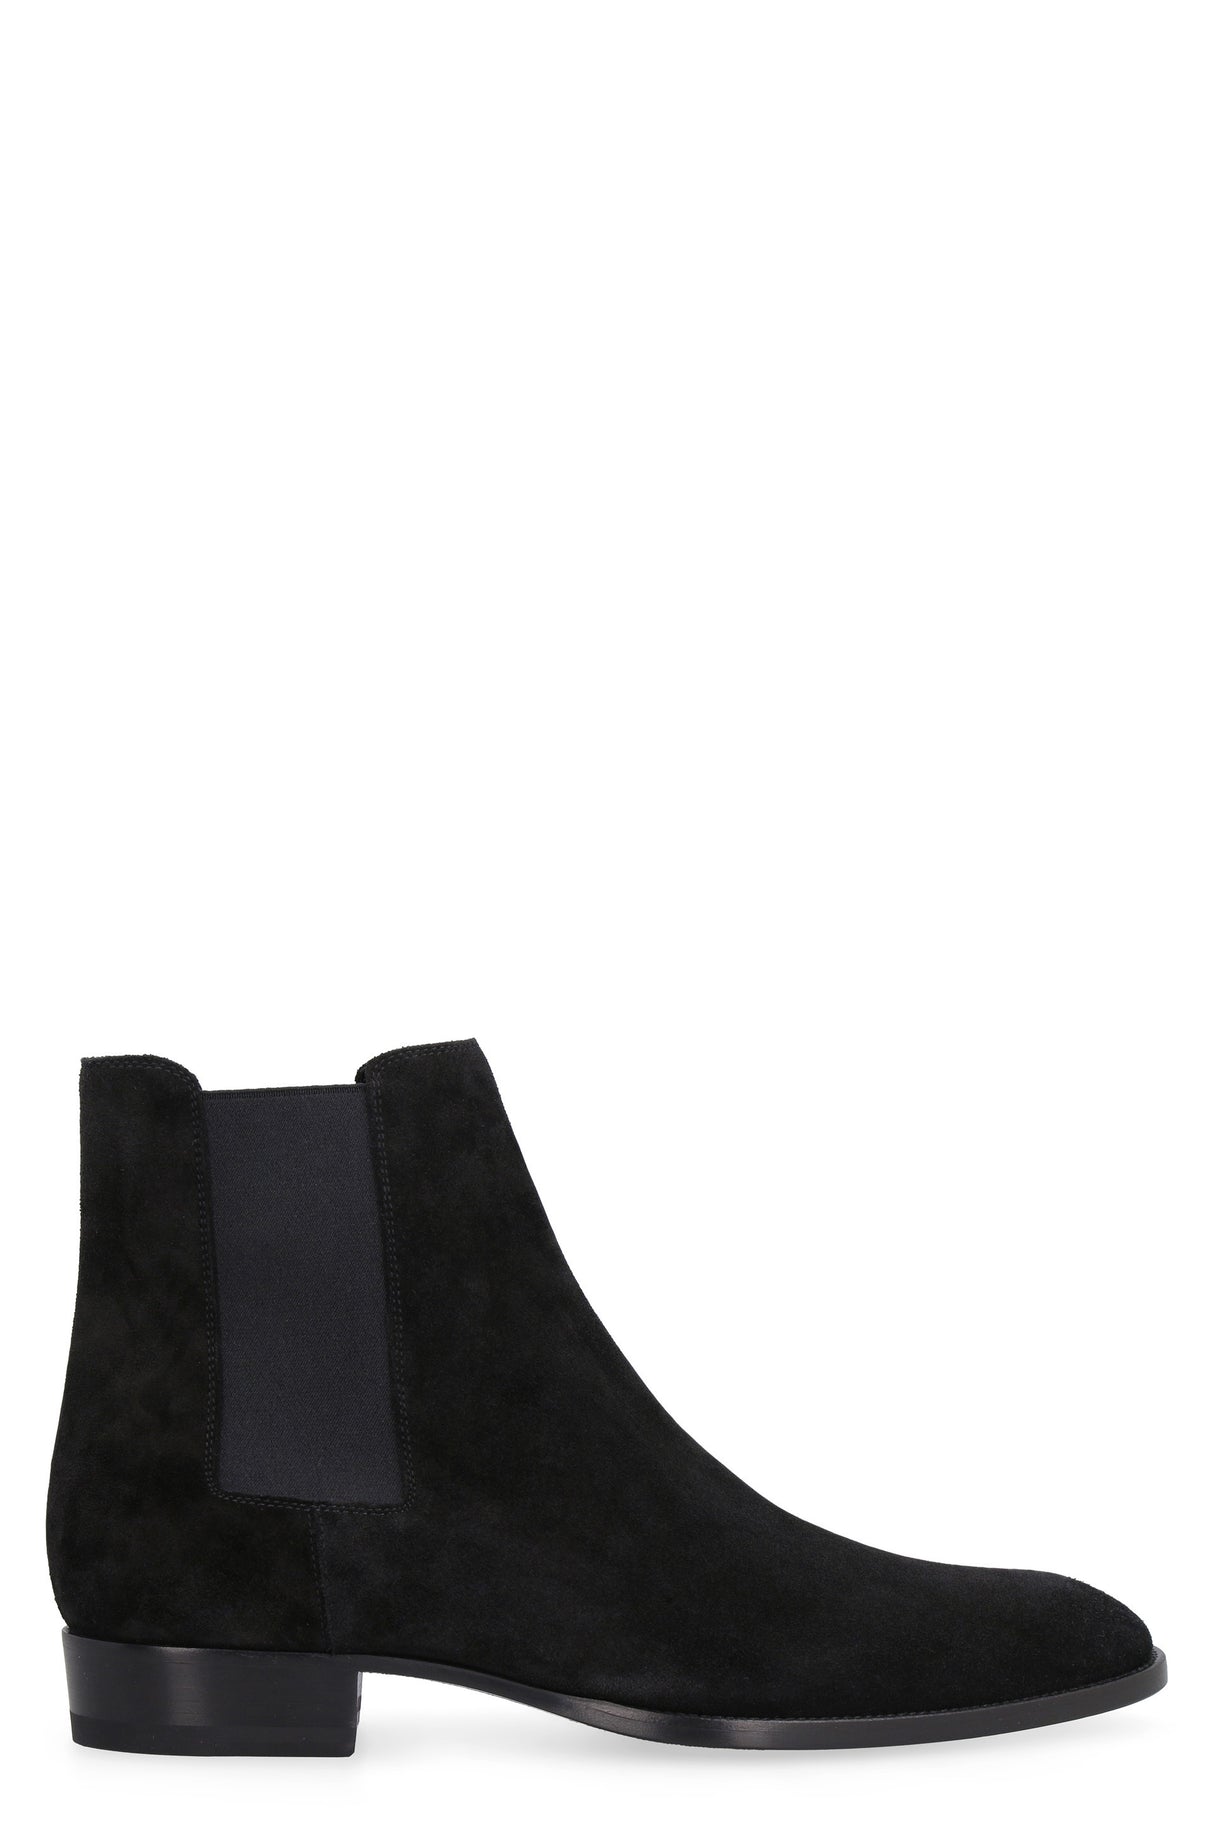 SAINT LAURENT Men's Black Suede Chelsea Boots with Elastic Inserts - 2024 Carryover Collection